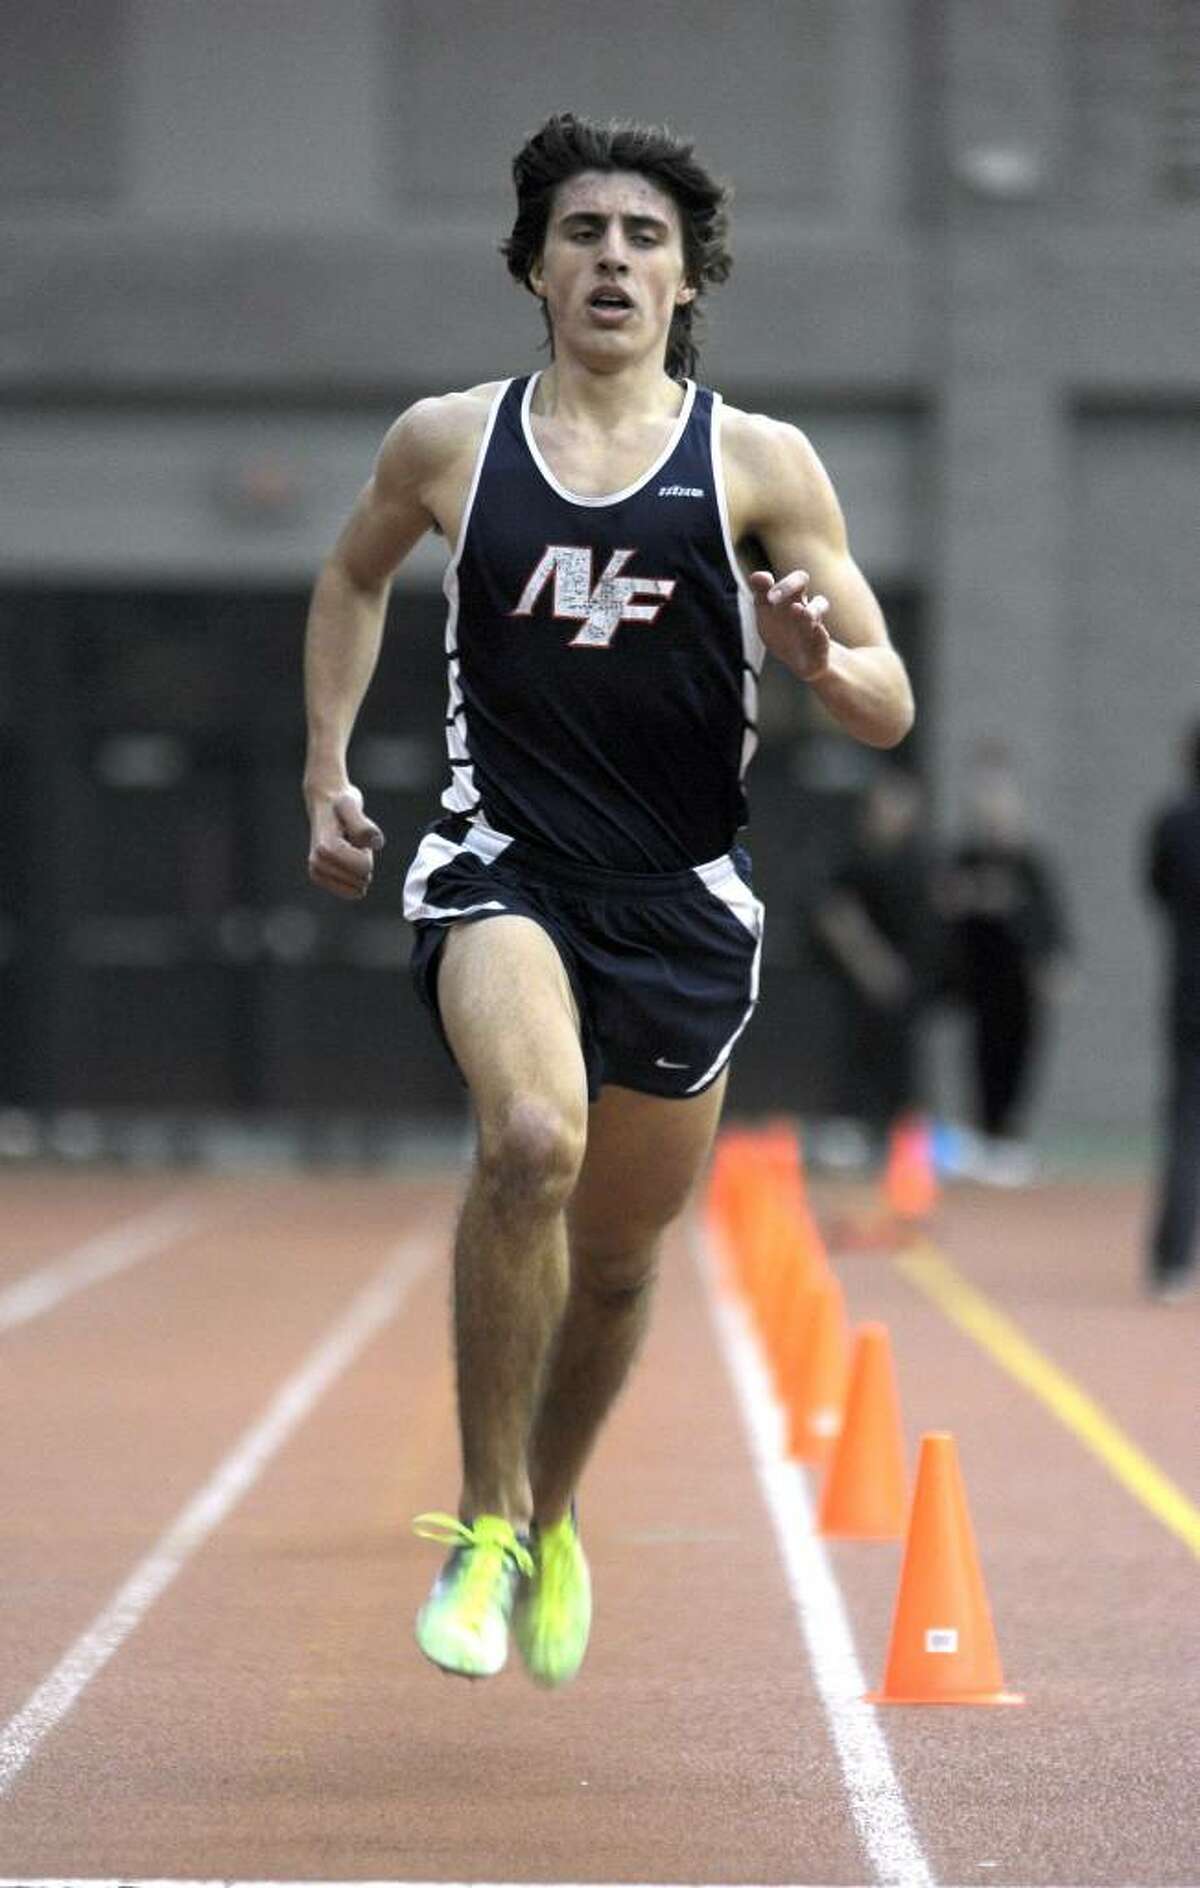 John Raneri, 18, of New Fairfield, winner of the 1600 meter race at the Southwest Conference Indoor Track and Field Championships, Saturday, February 6, 2010